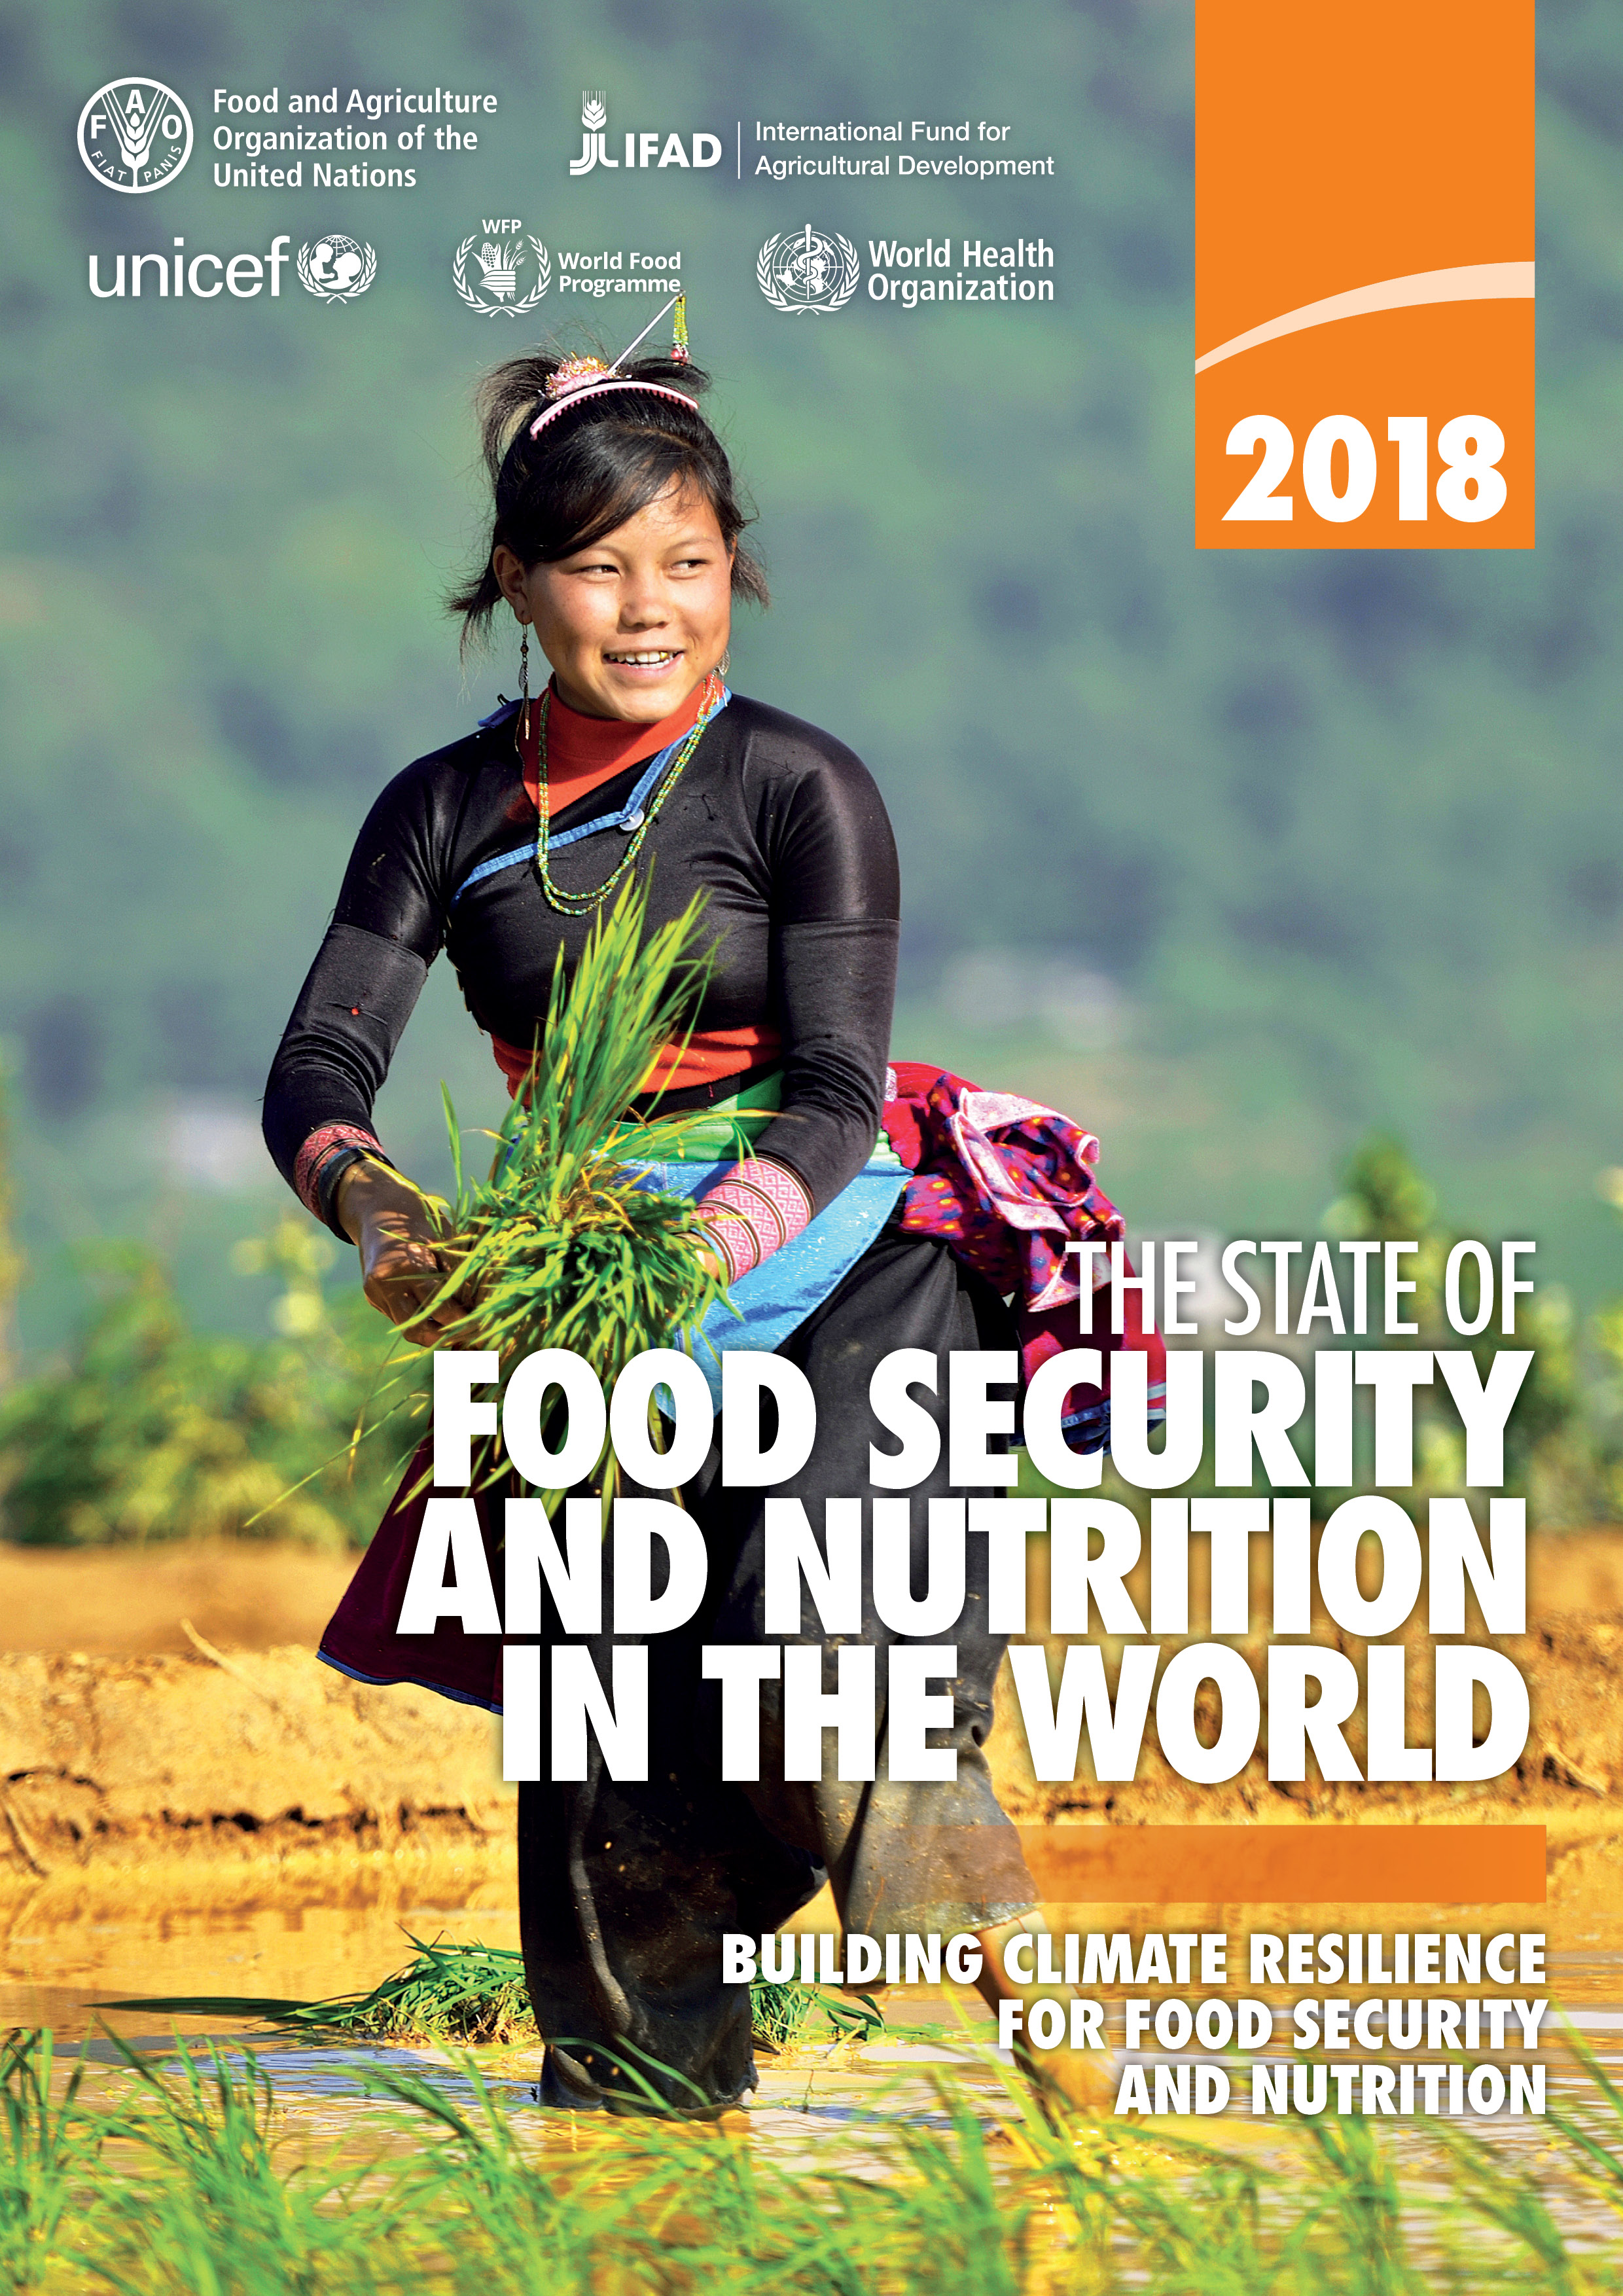 UN to launch new progress report on achieving Zero Hunger World Food